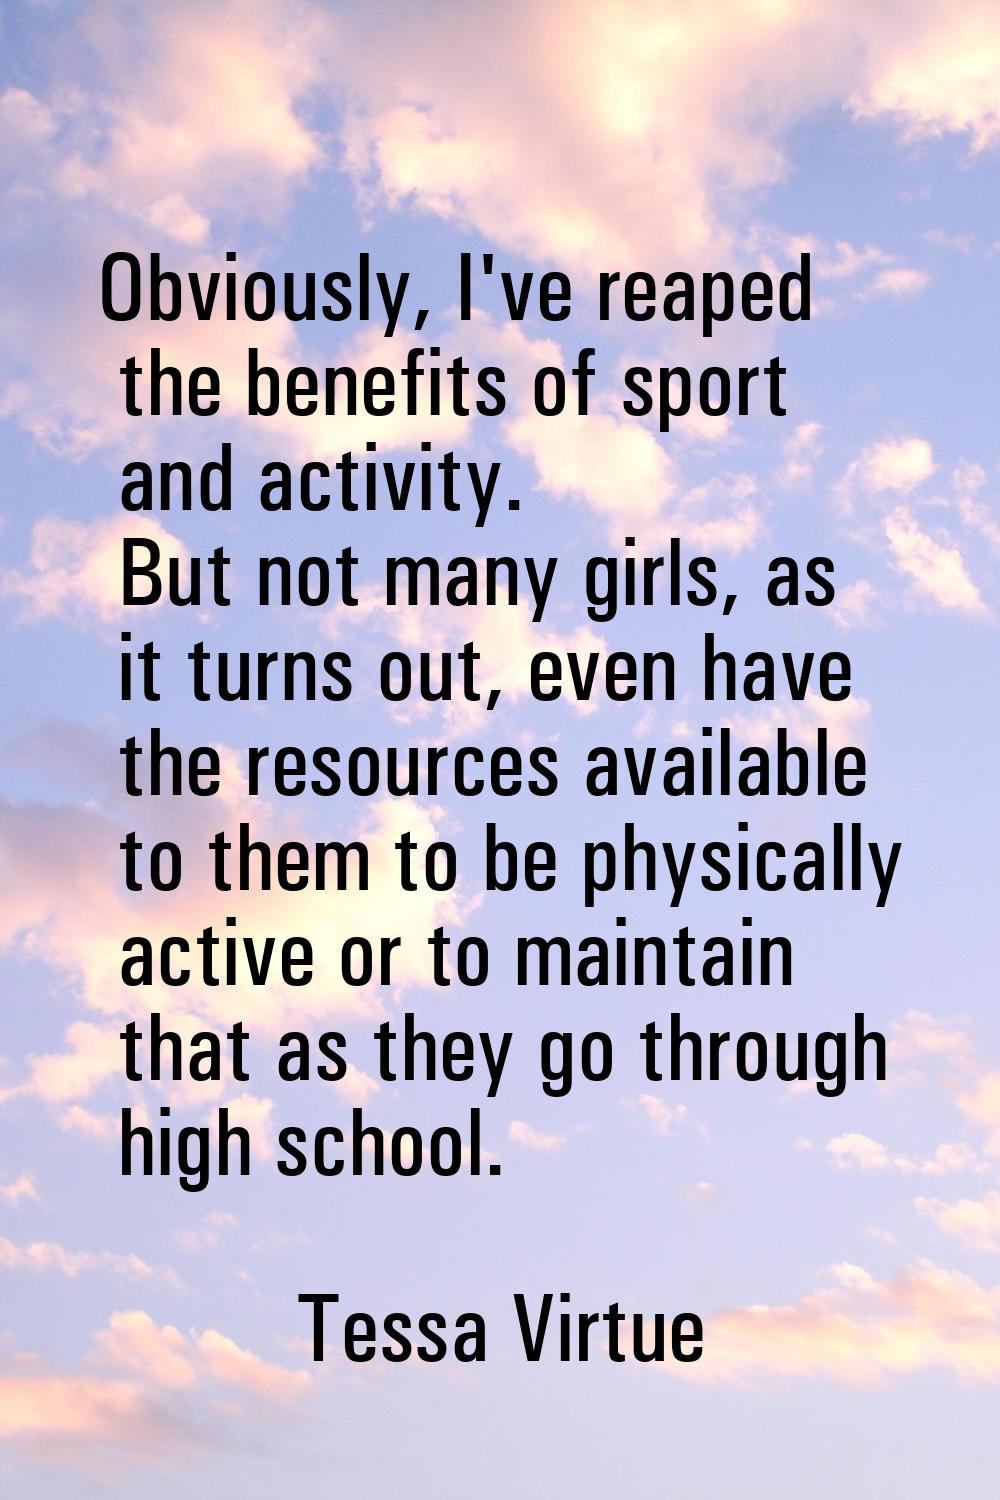 Obviously, I've reaped the benefits of sport and activity. But not many girls, as it turns out, eve